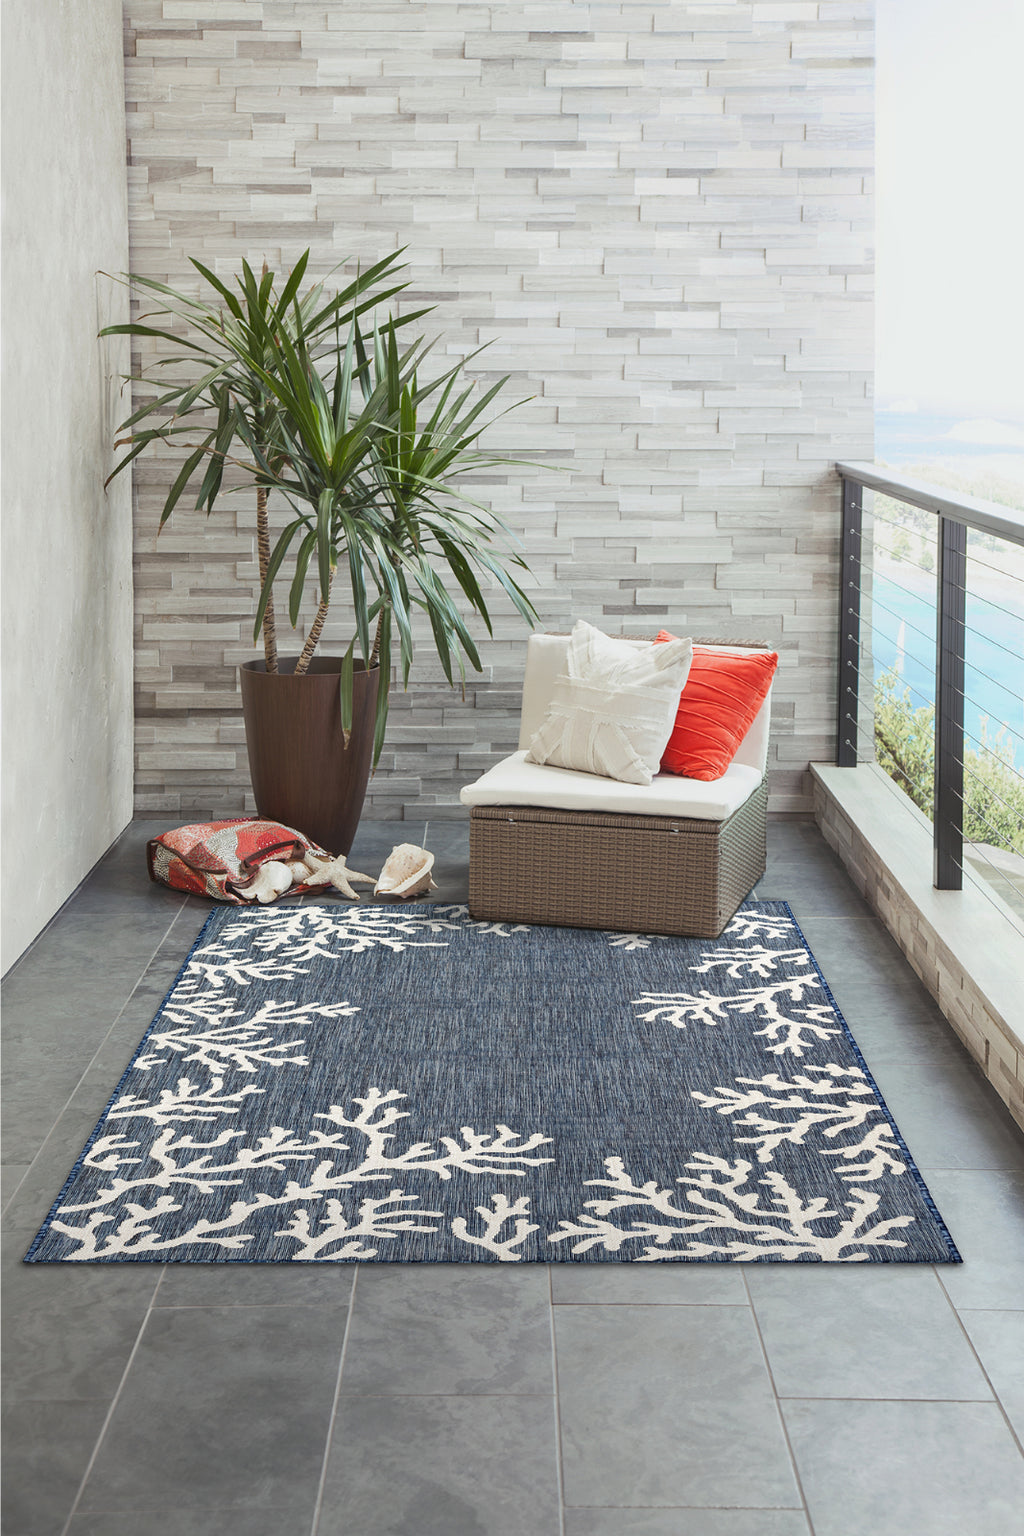 Trans Ocean Carmel 8448/33 Coral Border Blue Area Rug by Liora Manne Room Scene Image Feature